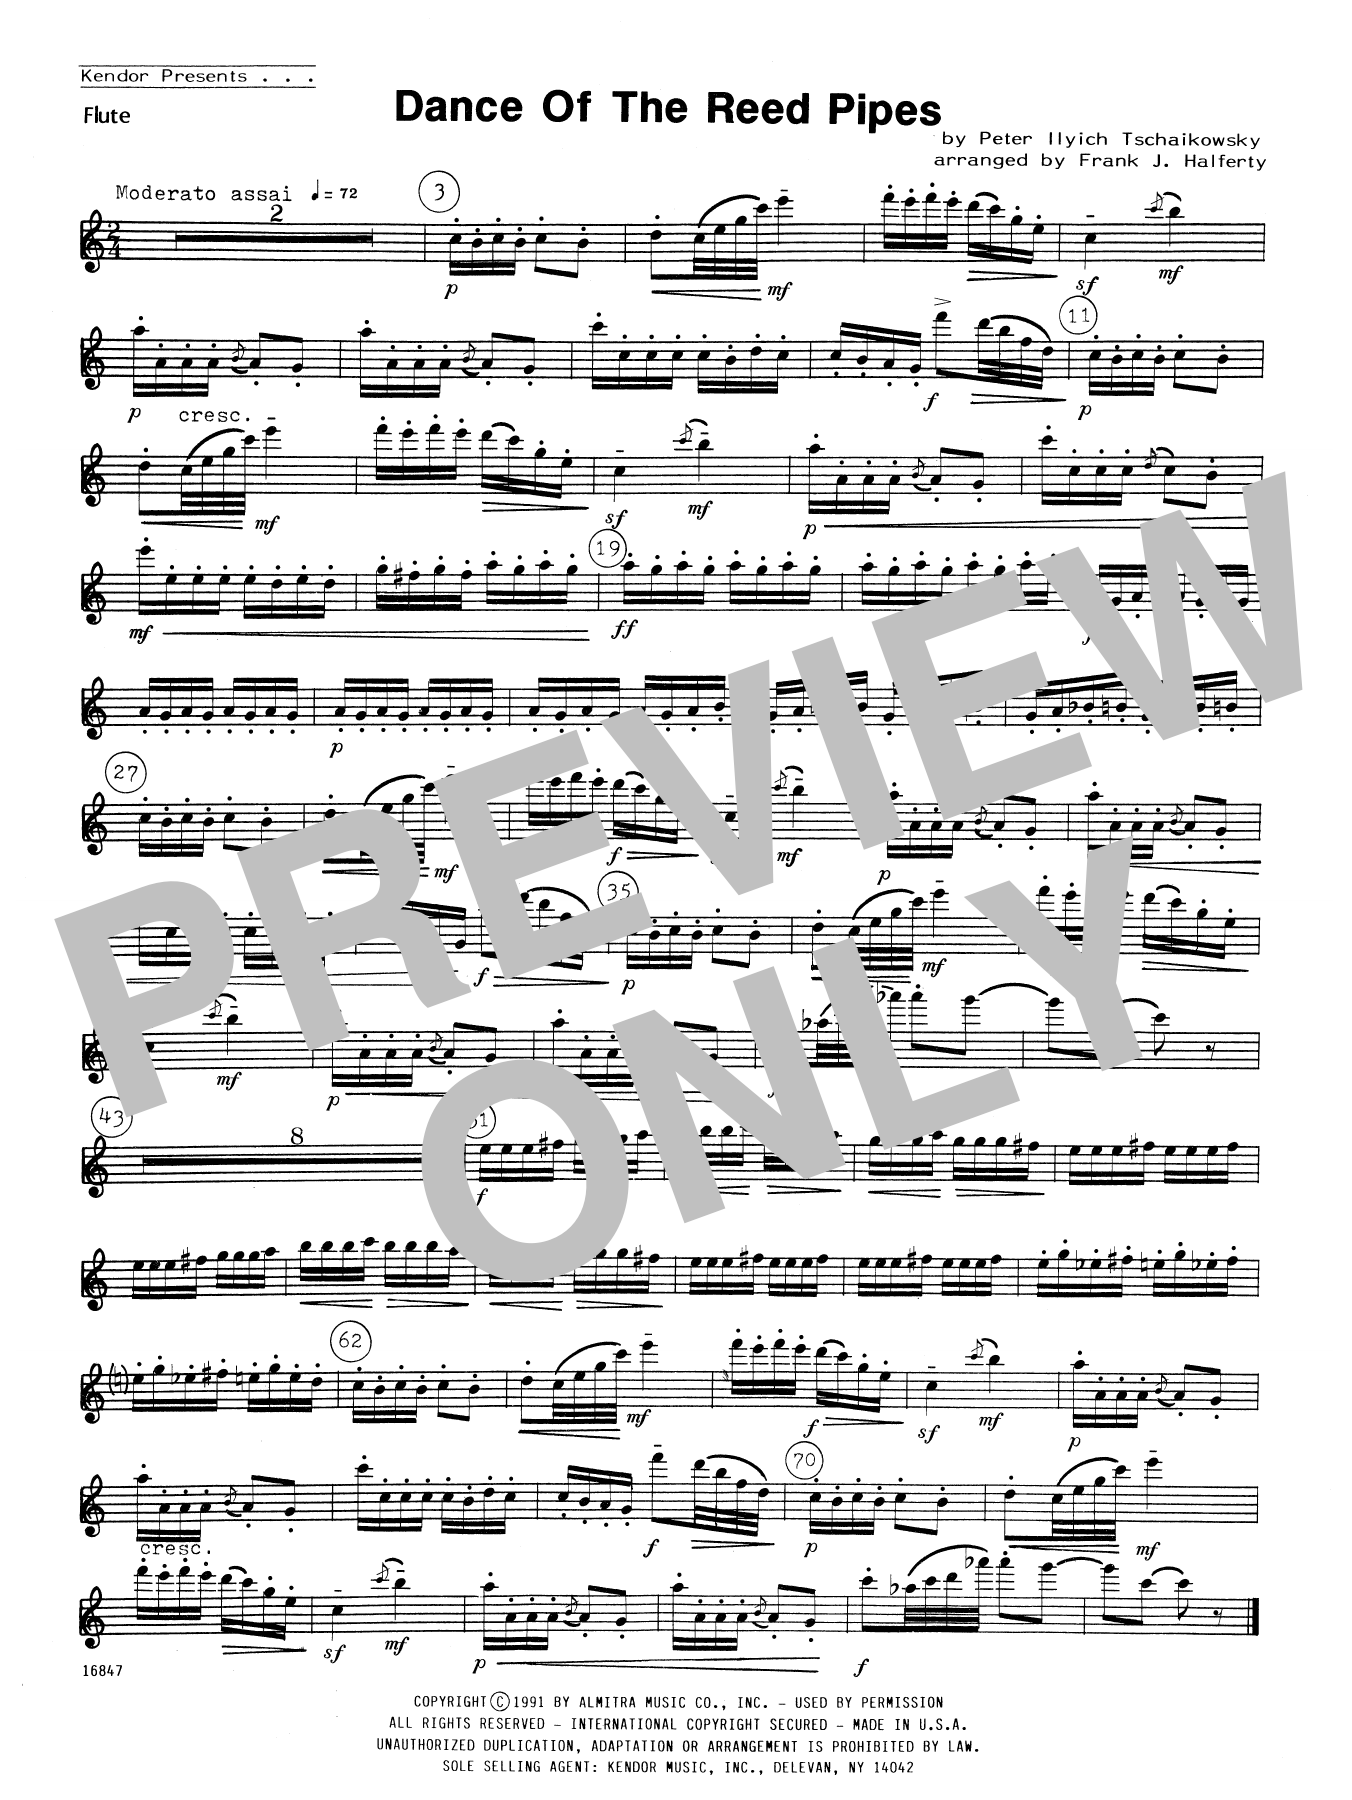 Frank J. Halferty Dance Of The Reed Pipes - Flute sheet music notes and chords. Download Printable PDF.